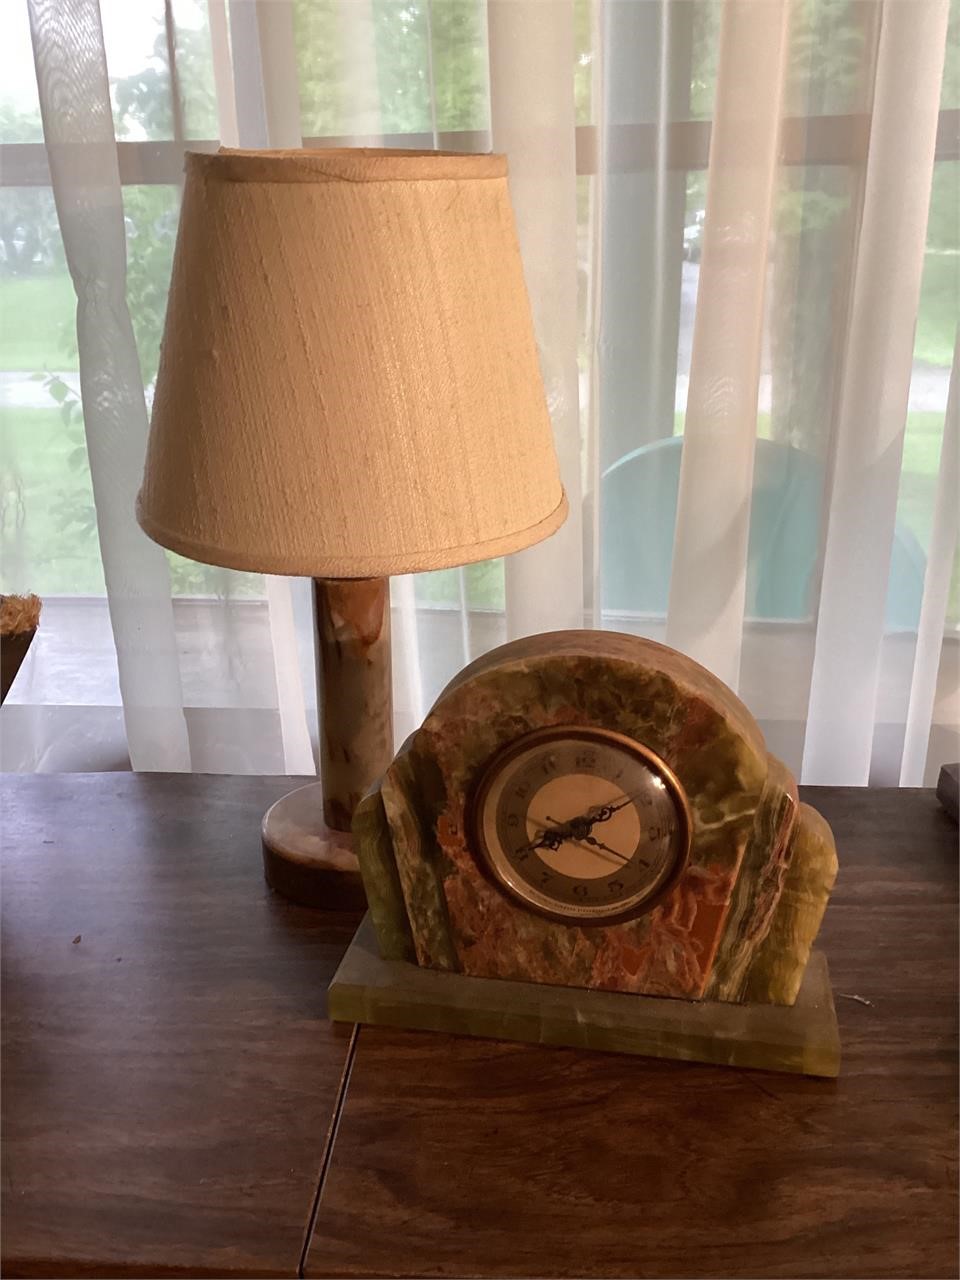 Marble lamp and clock